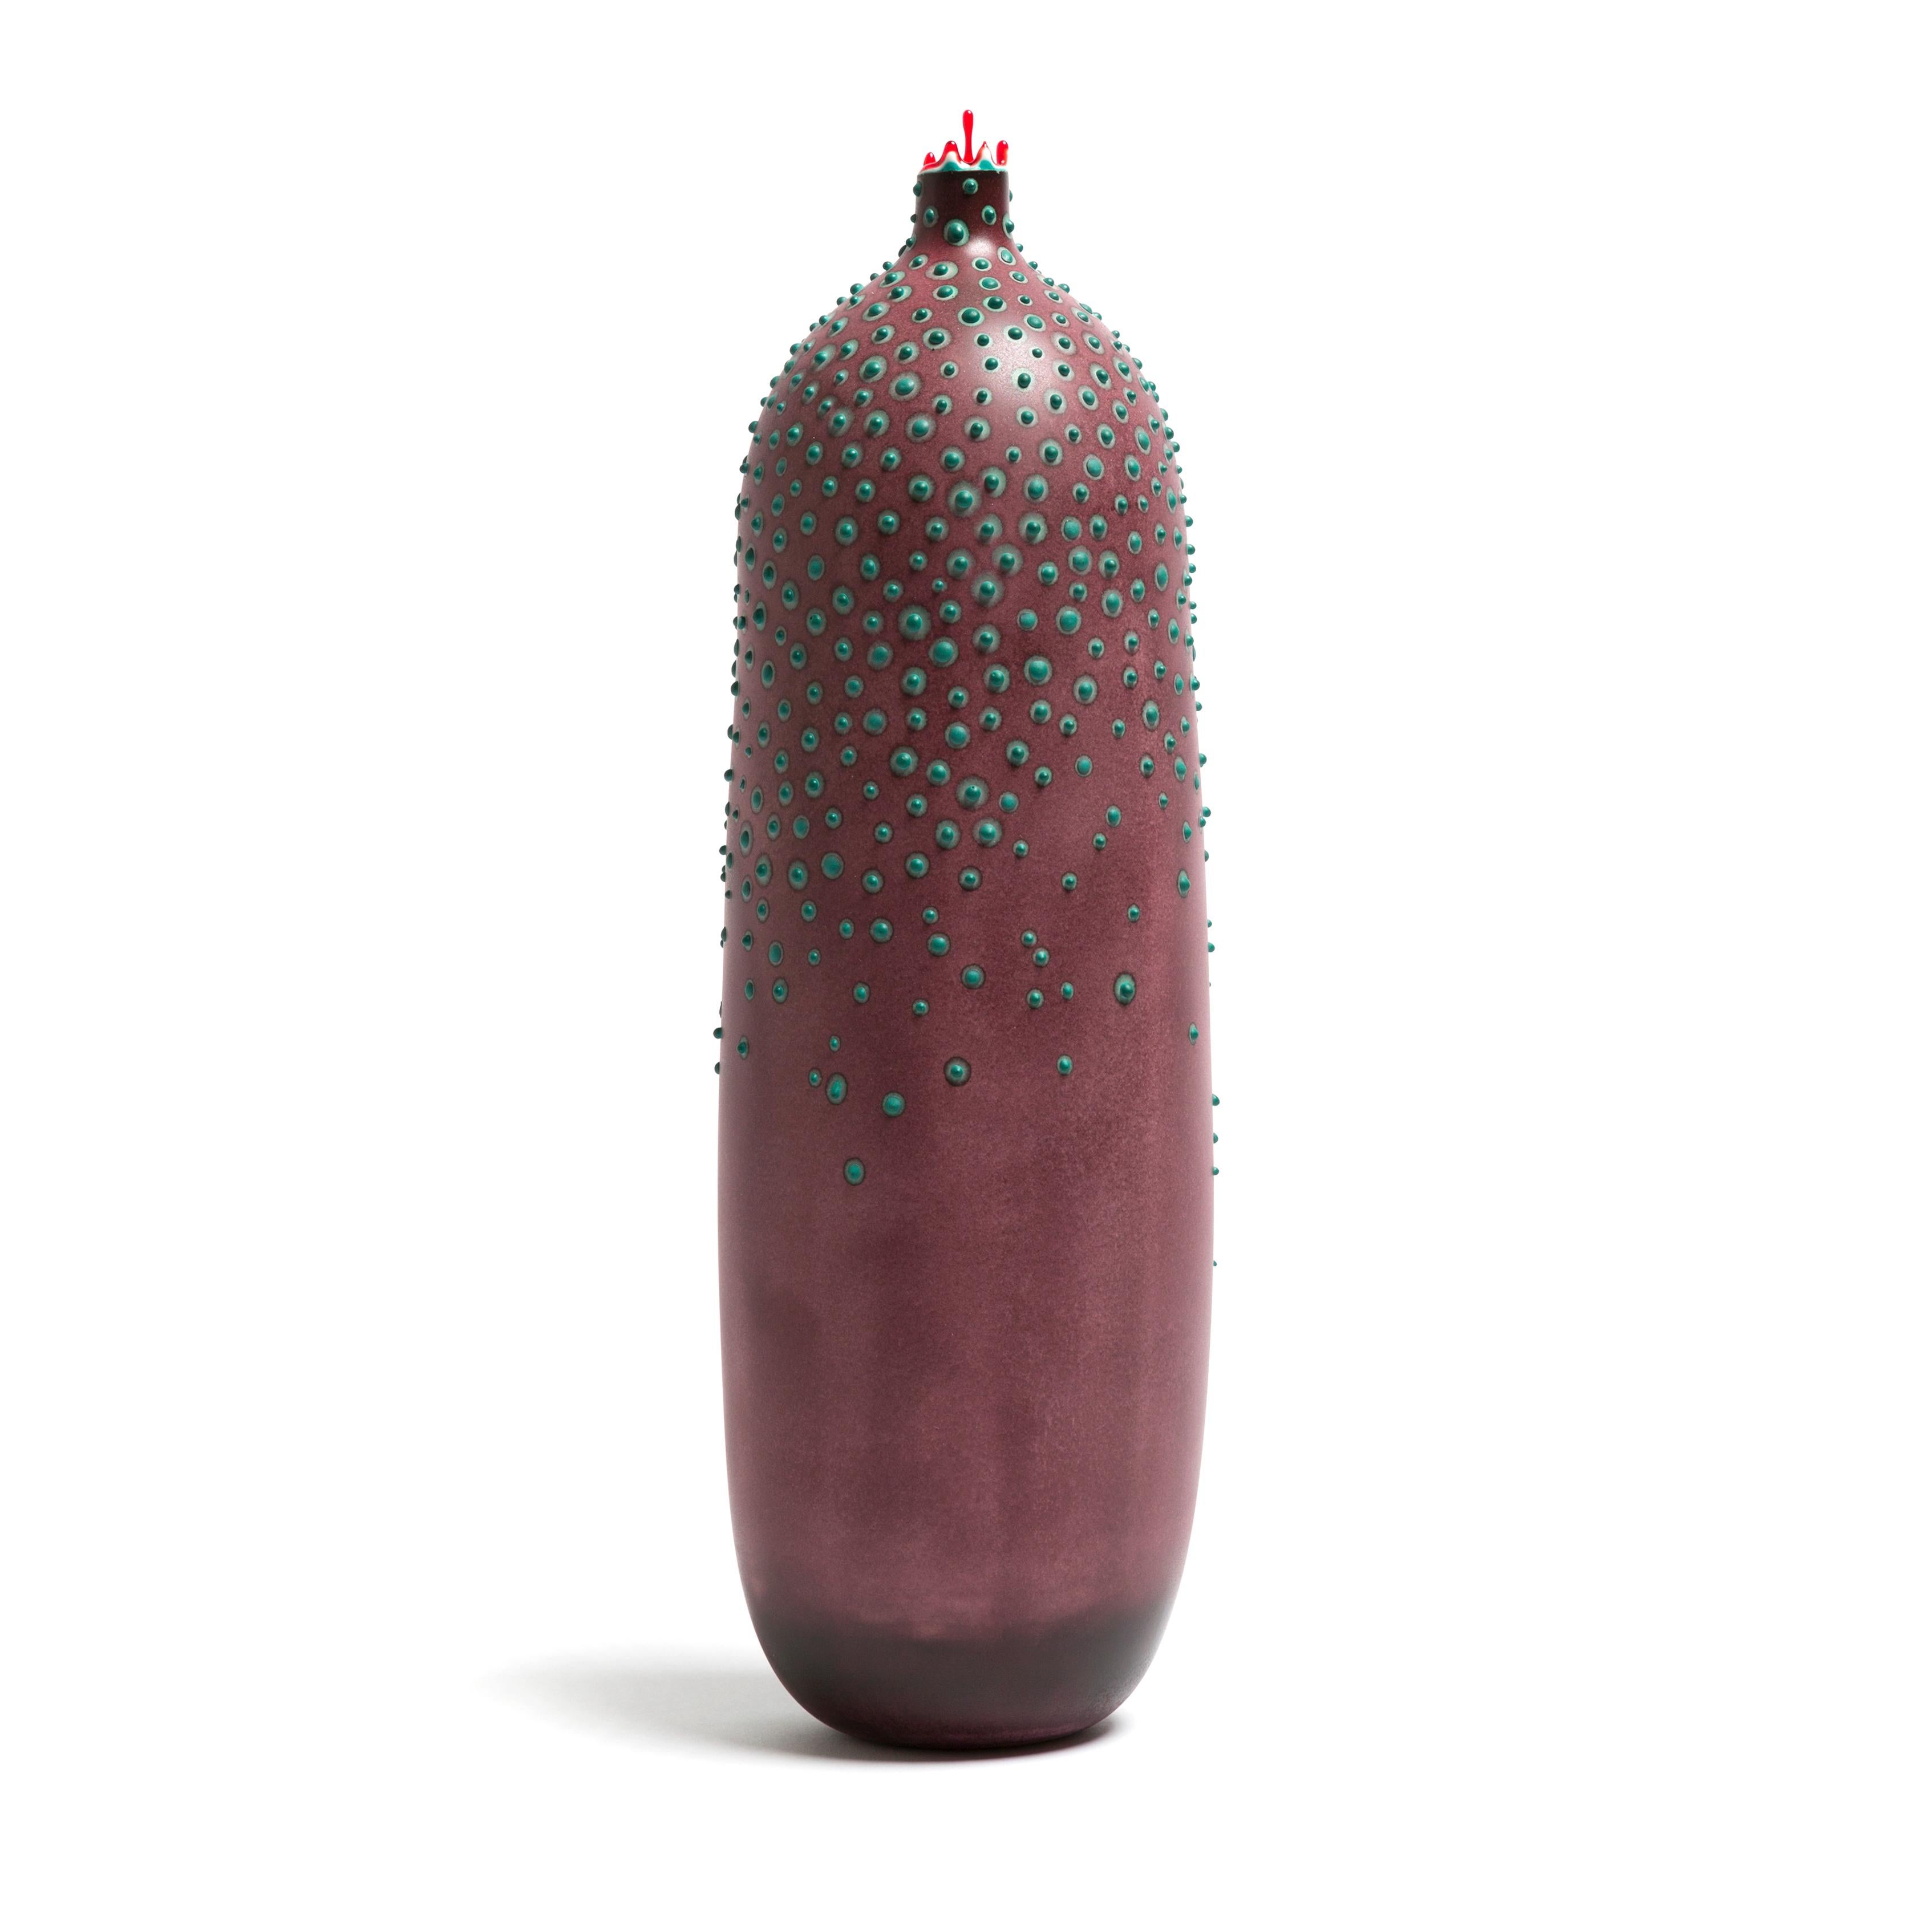 Oxide Dubos vase by Elyse Graham.
Dimensions: W 14 x D 14 x H 38 cm.
Materials: plaster, resin.
Molded, dyed, and finished by hand in LA. customization.
Available.
All pieces are made to order.

Our Microbe Collection is inspired by the